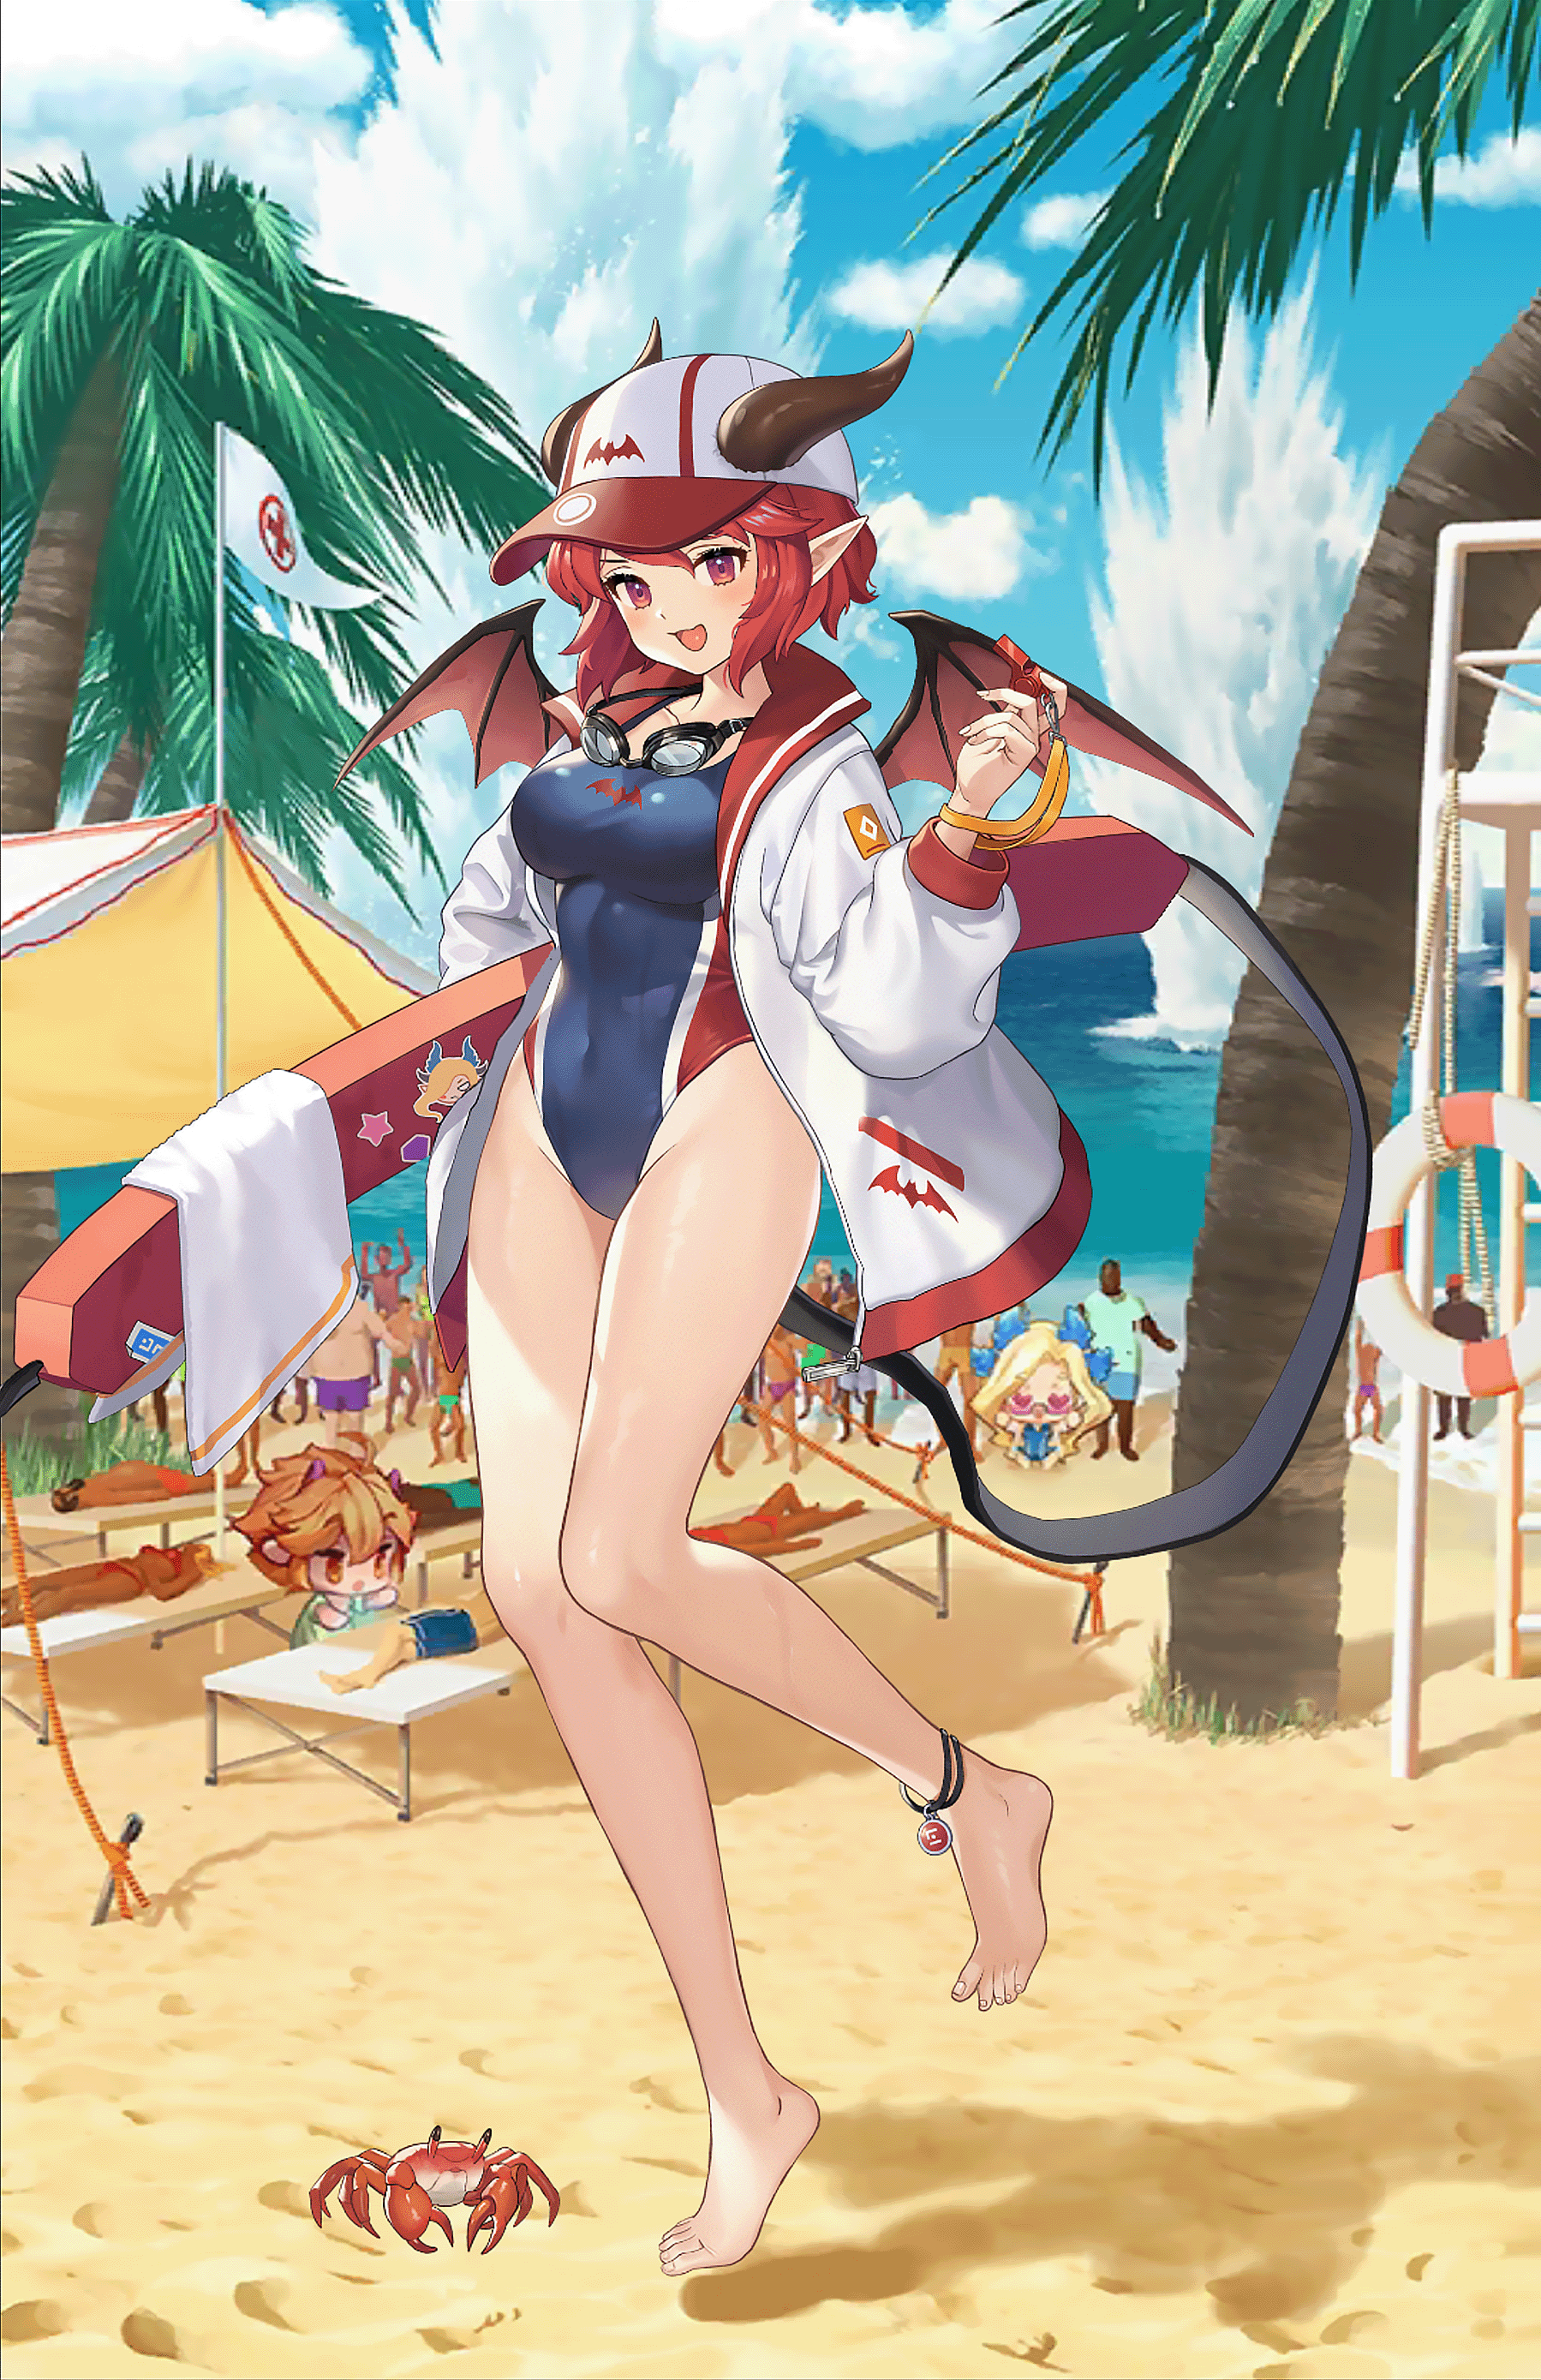 Anime 1799x2778 Guardian Tales Yuze (Guardian Tales) succubus wings bat wings horns red eyes redhead pointy ears beach Lifeguard swimwear hat crabs one-piece swimsuit palm trees